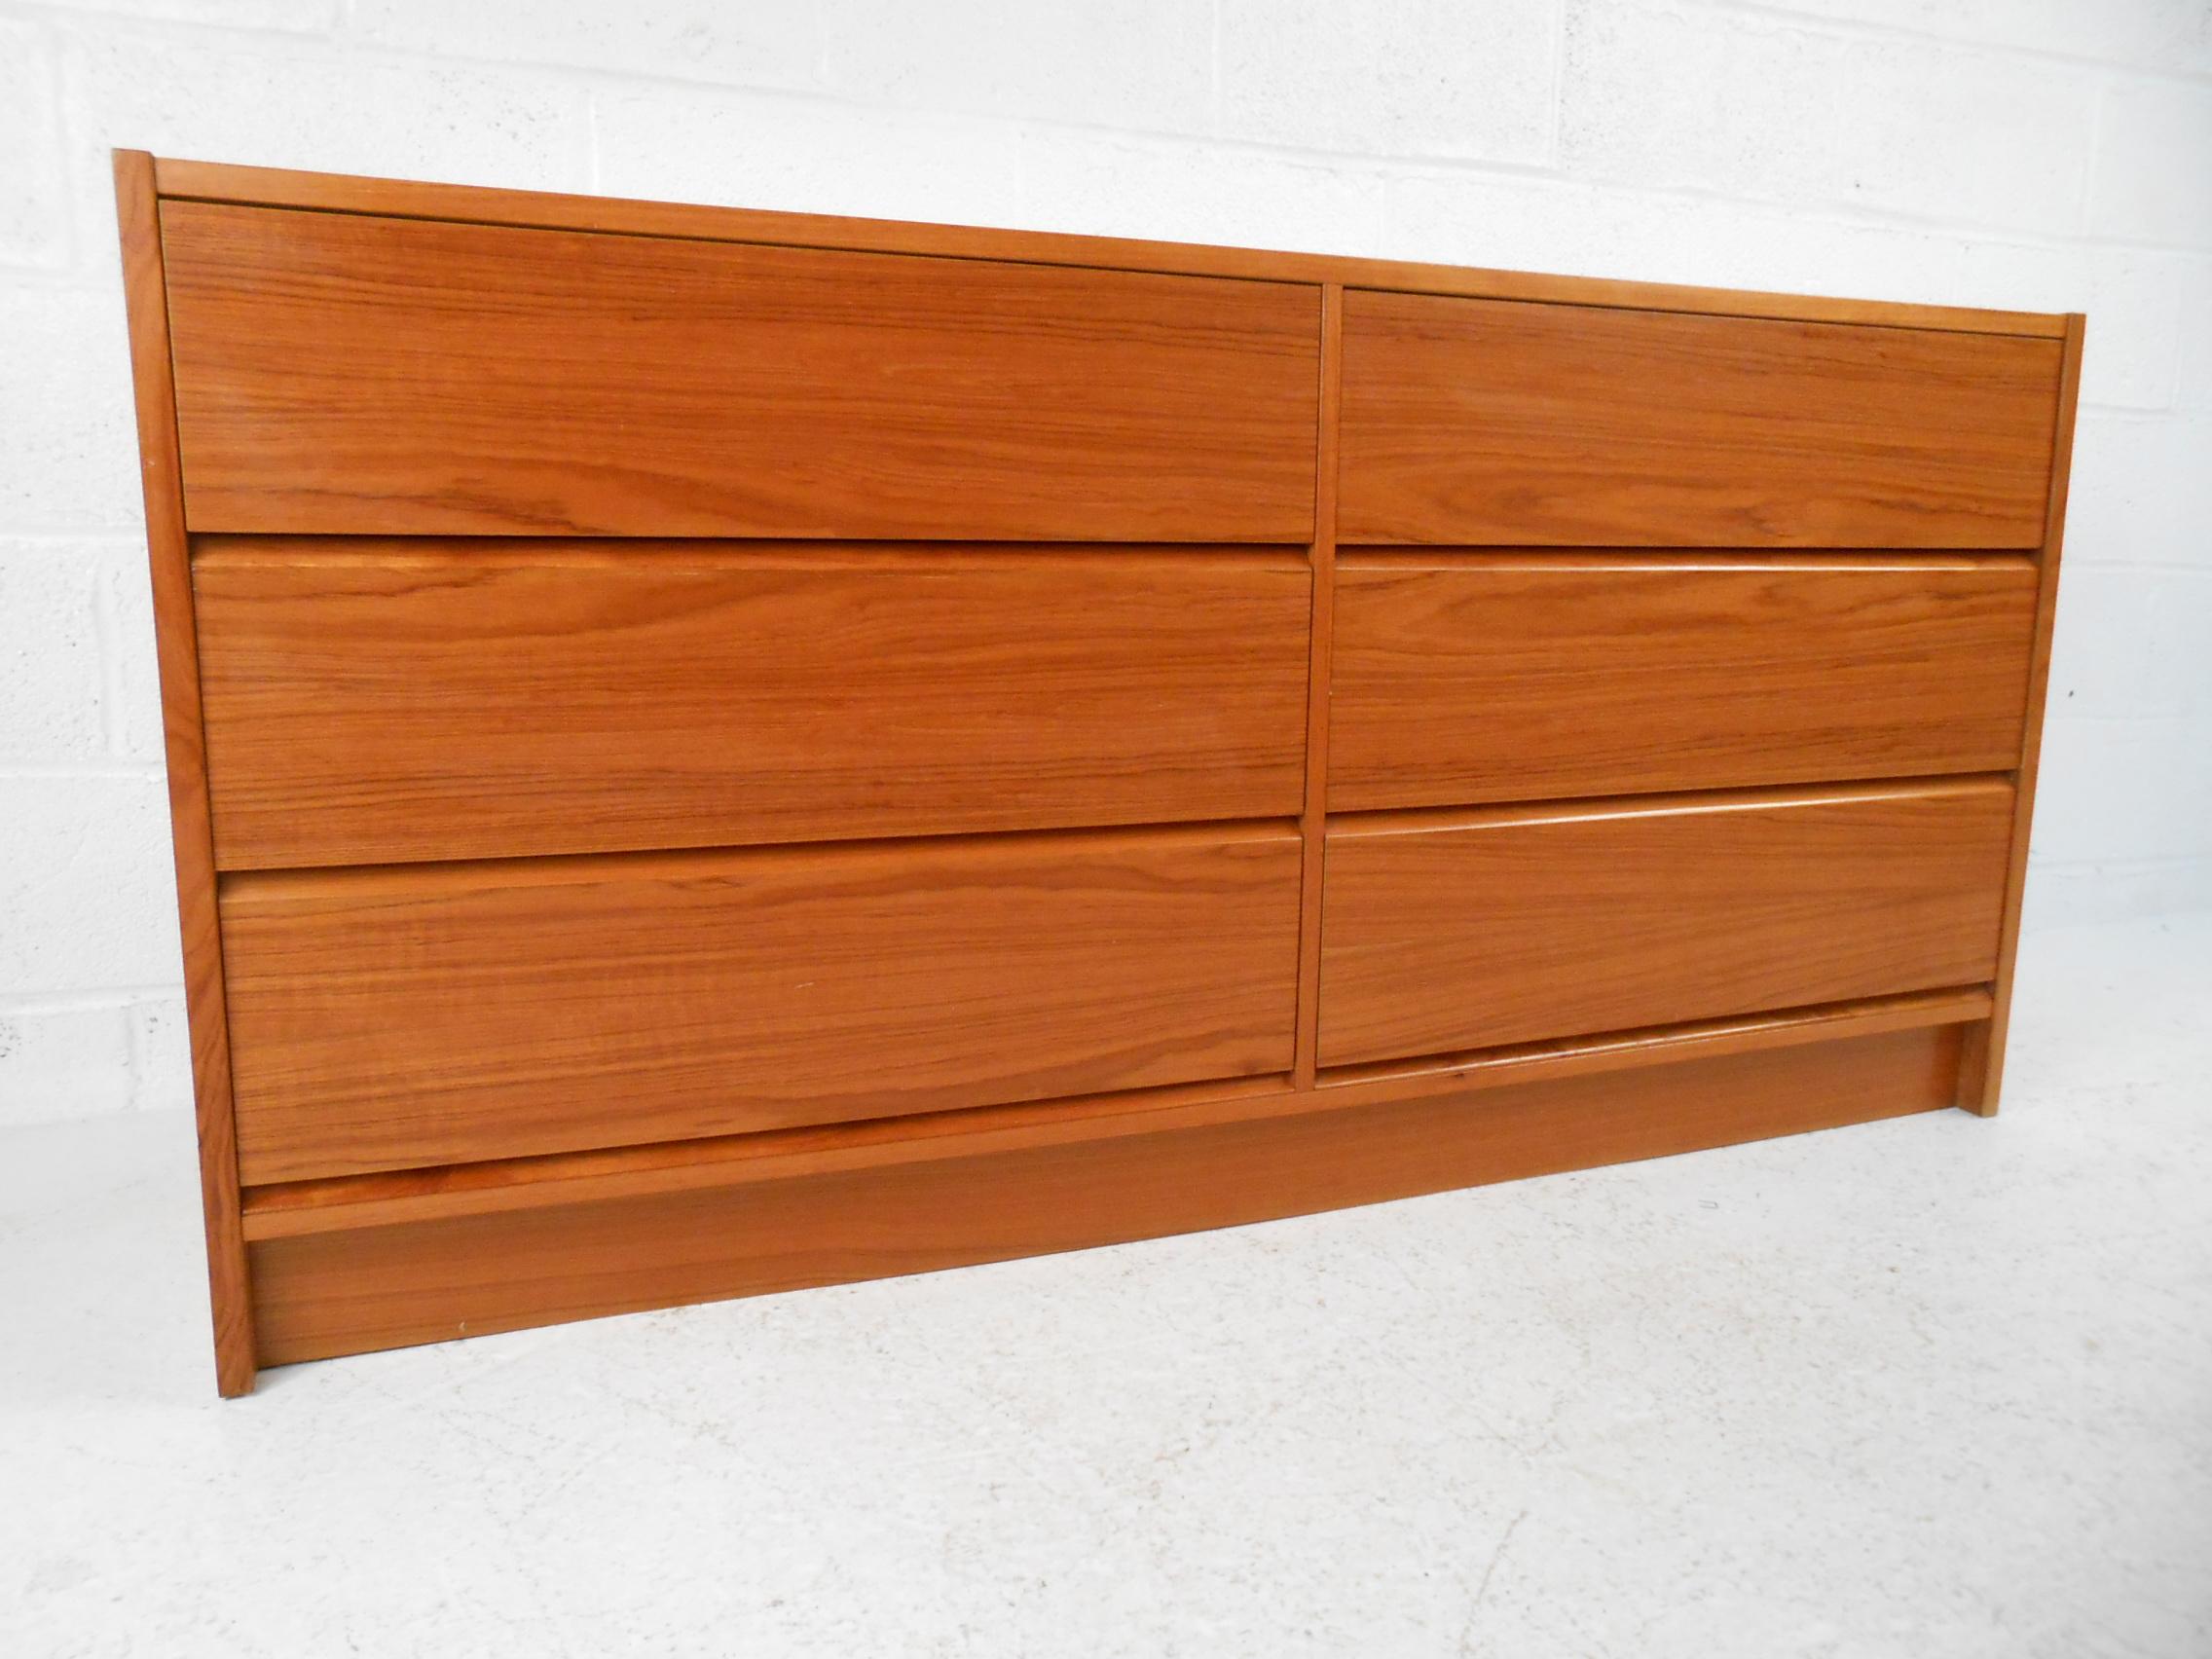 Handsome Danish modern six-drawer dresser. Teak veneer exterior with a nice color and grain pattern. Six spacious drawers with concealed pulls underneath the drawer-fronts. Simple and striking visual profile complimented by a skirt base. This Danish